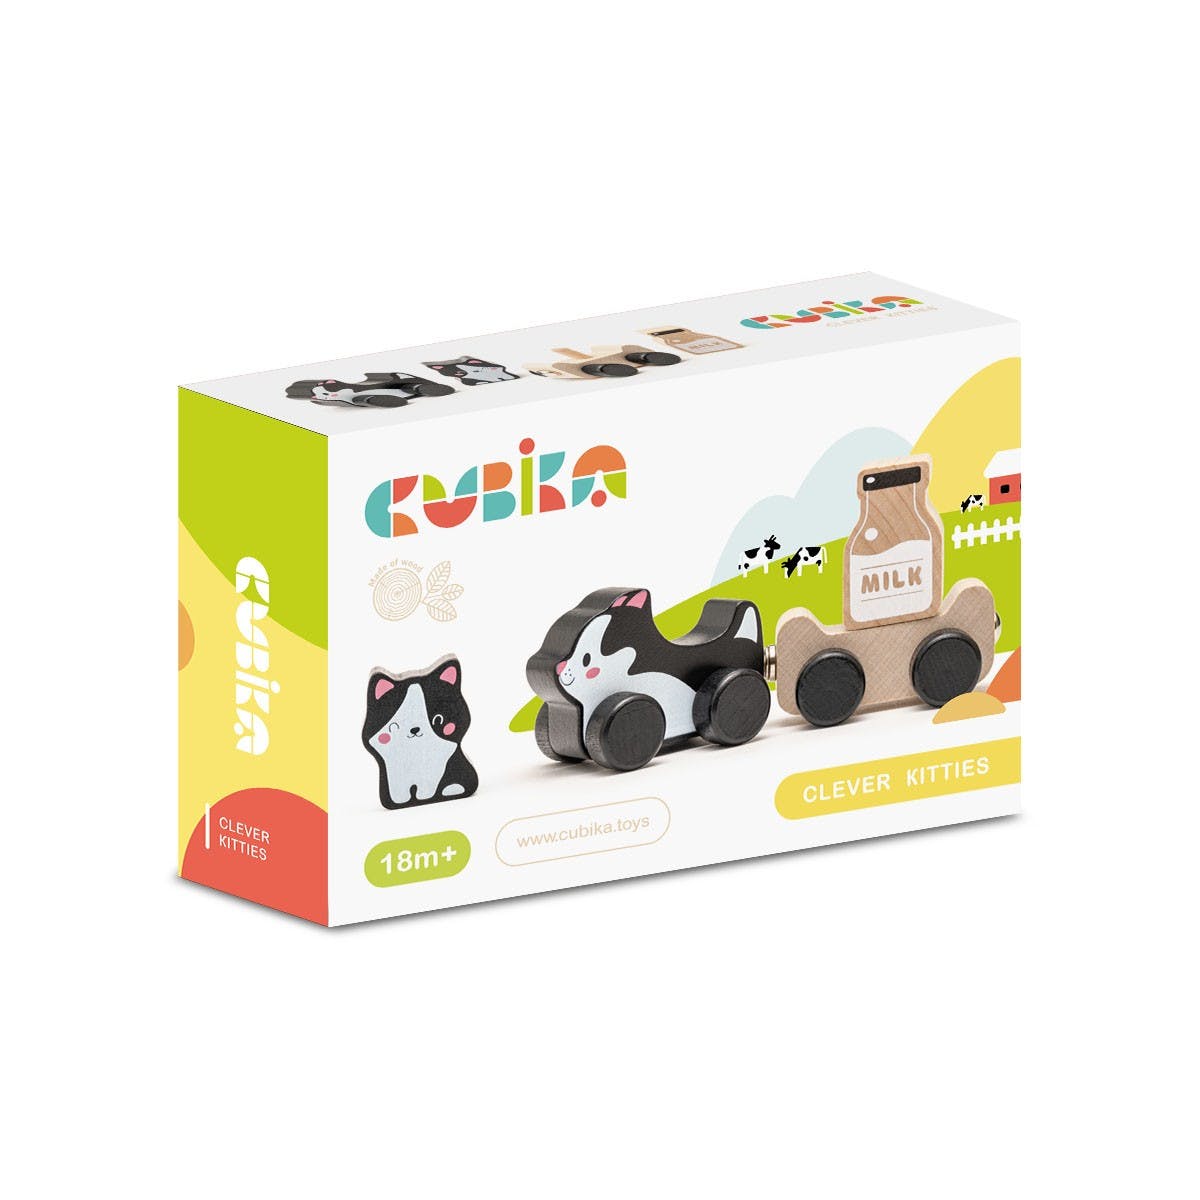 Cubika - Wooden toy "Clever Kitties" - Playlaan